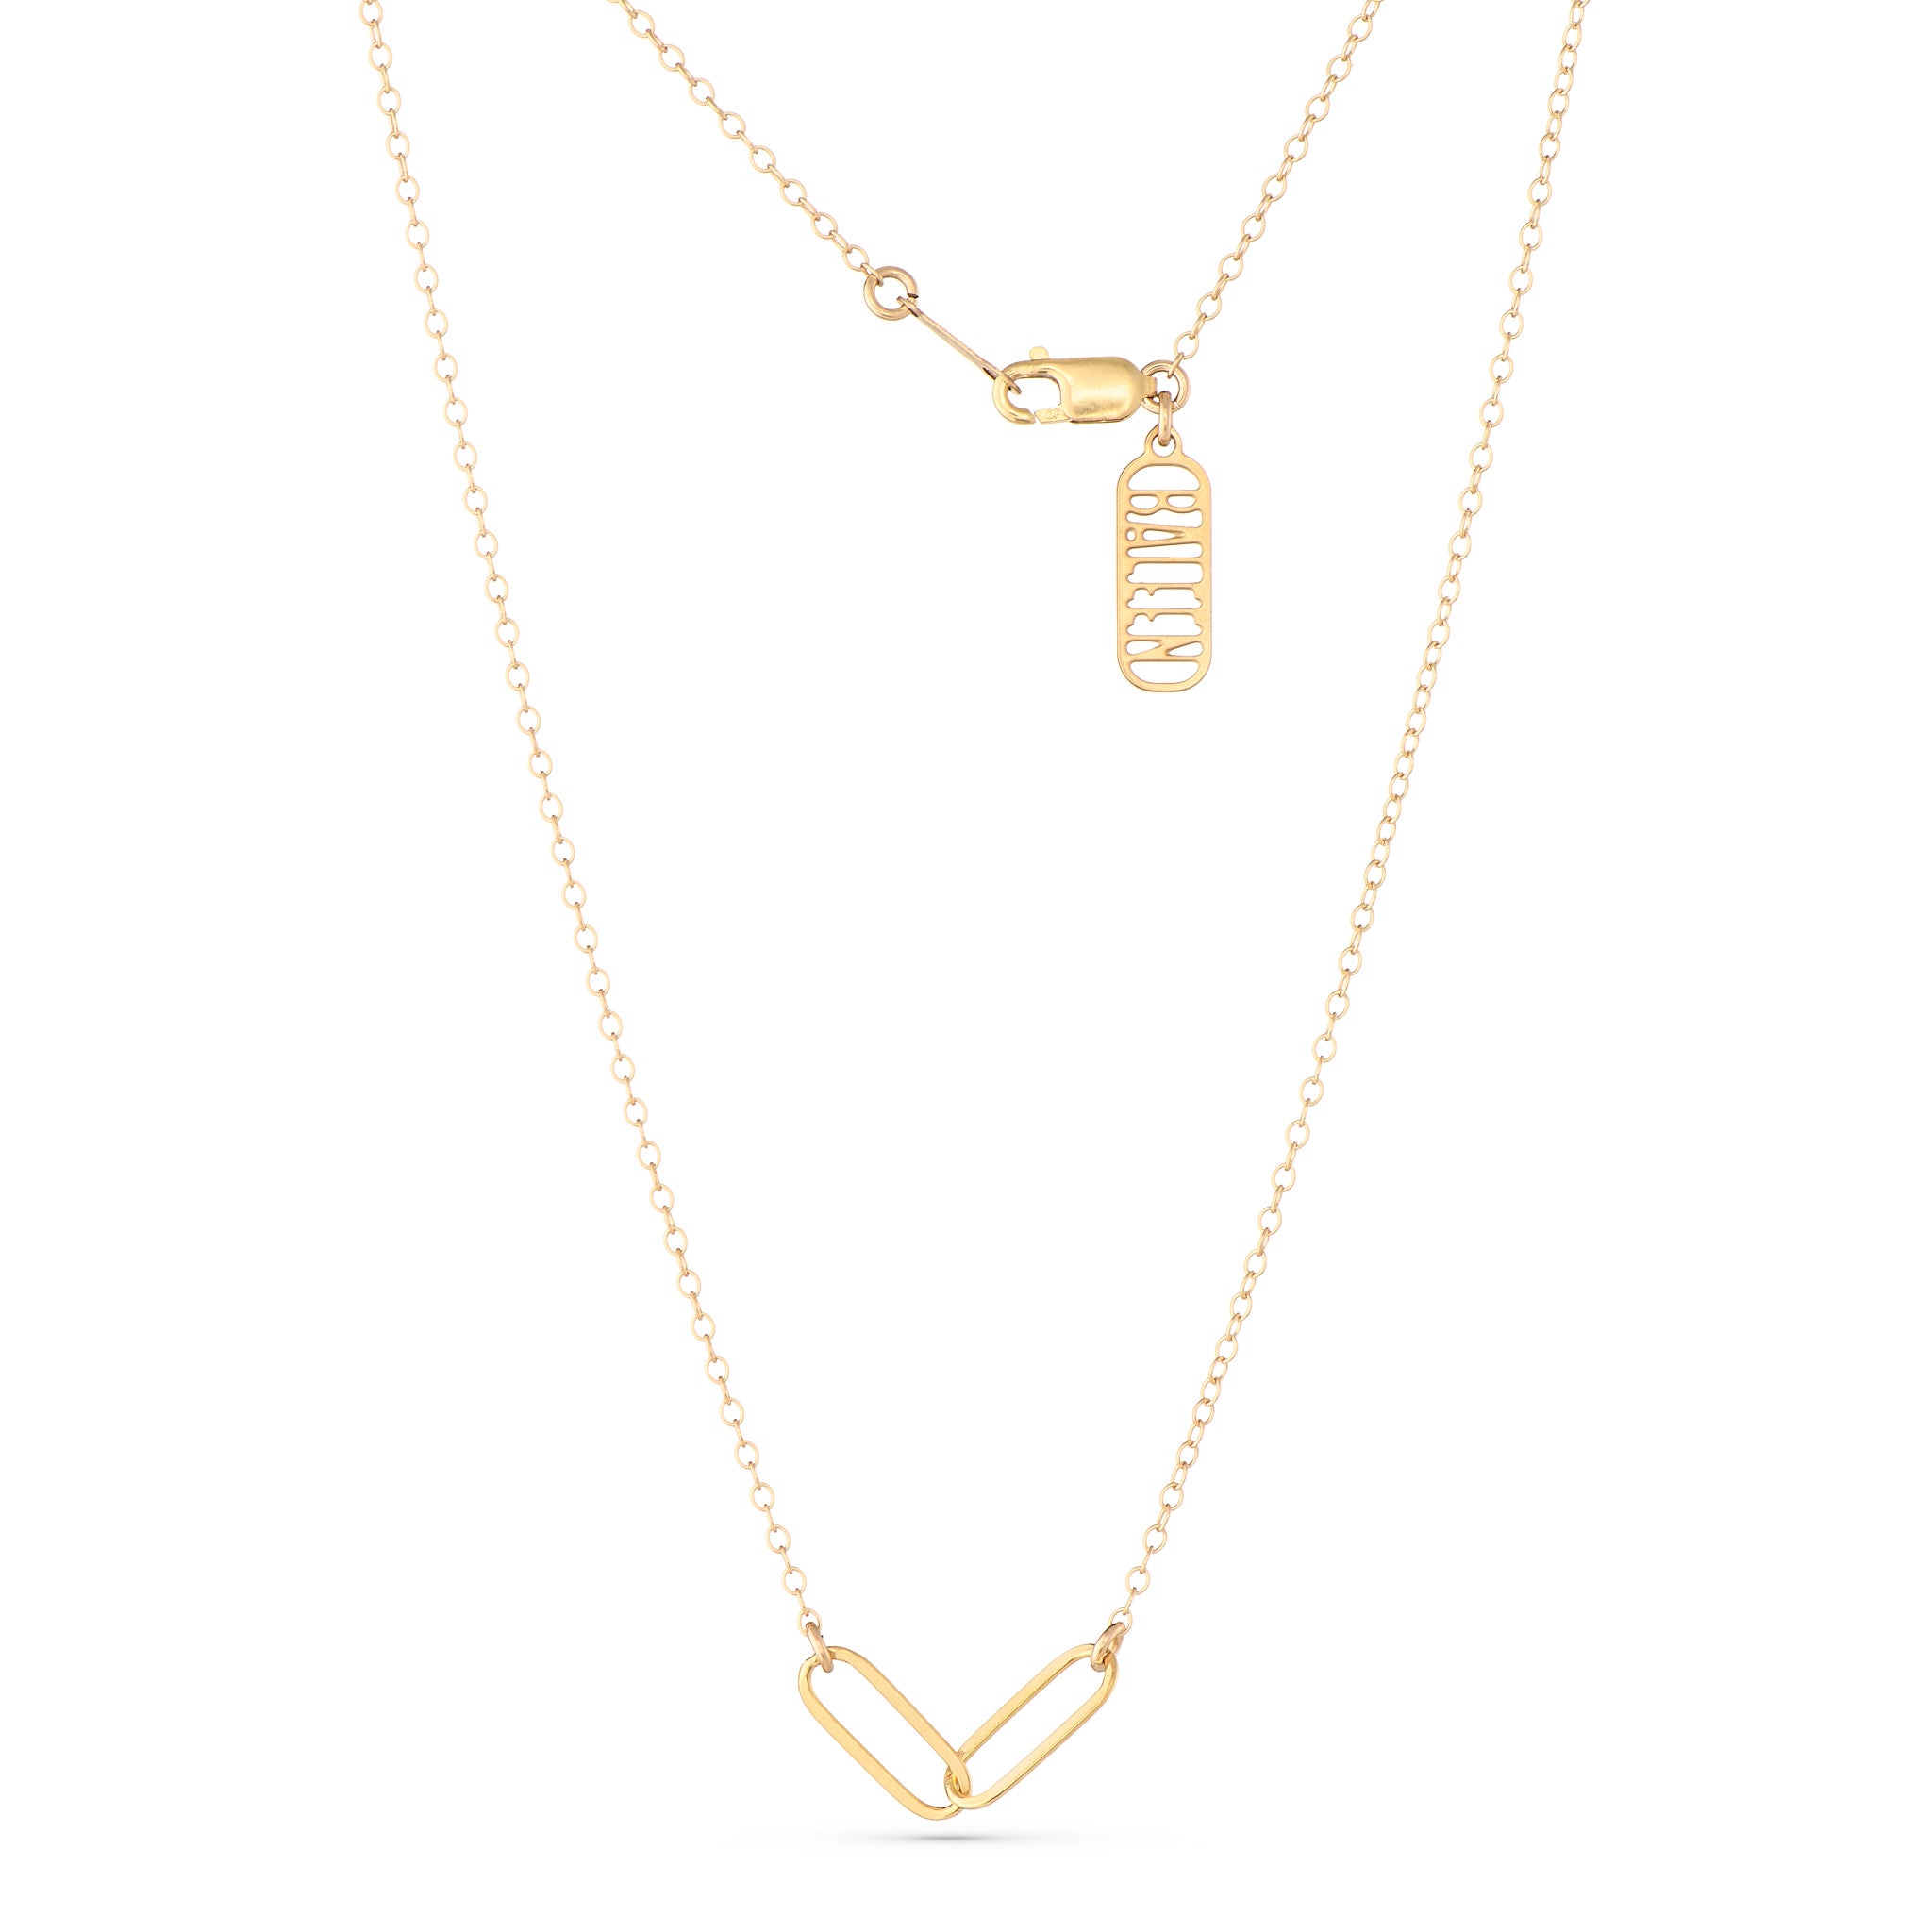 Kinfolk Necklace (available with 2-5 links)